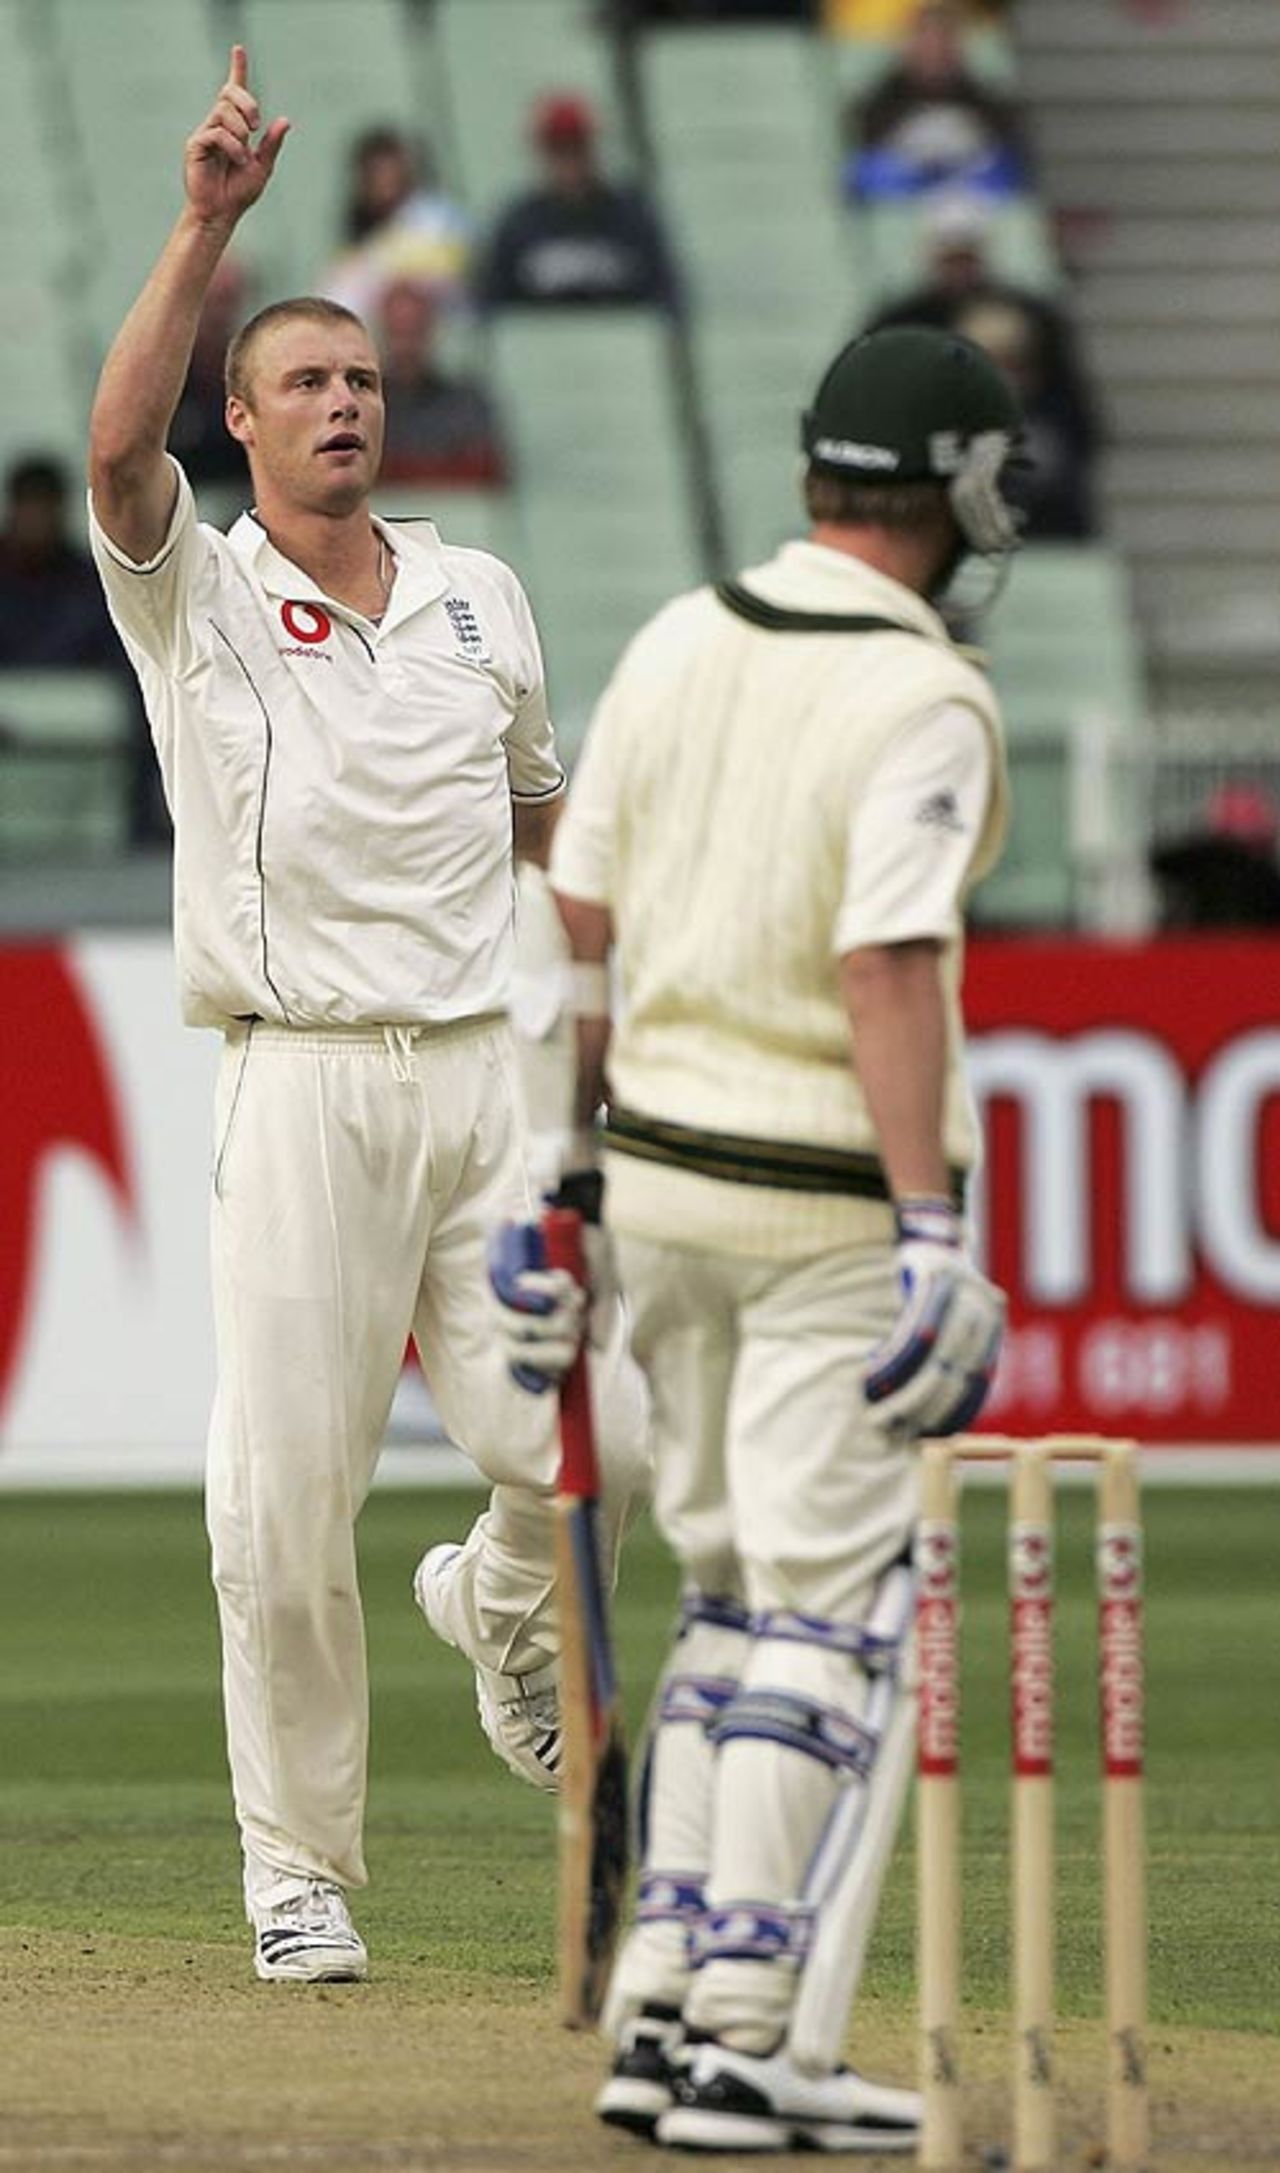 Andrew Flintoff claims Brett Lee caught behind first ball, 4th Test, Melbourne, December 26, 2006